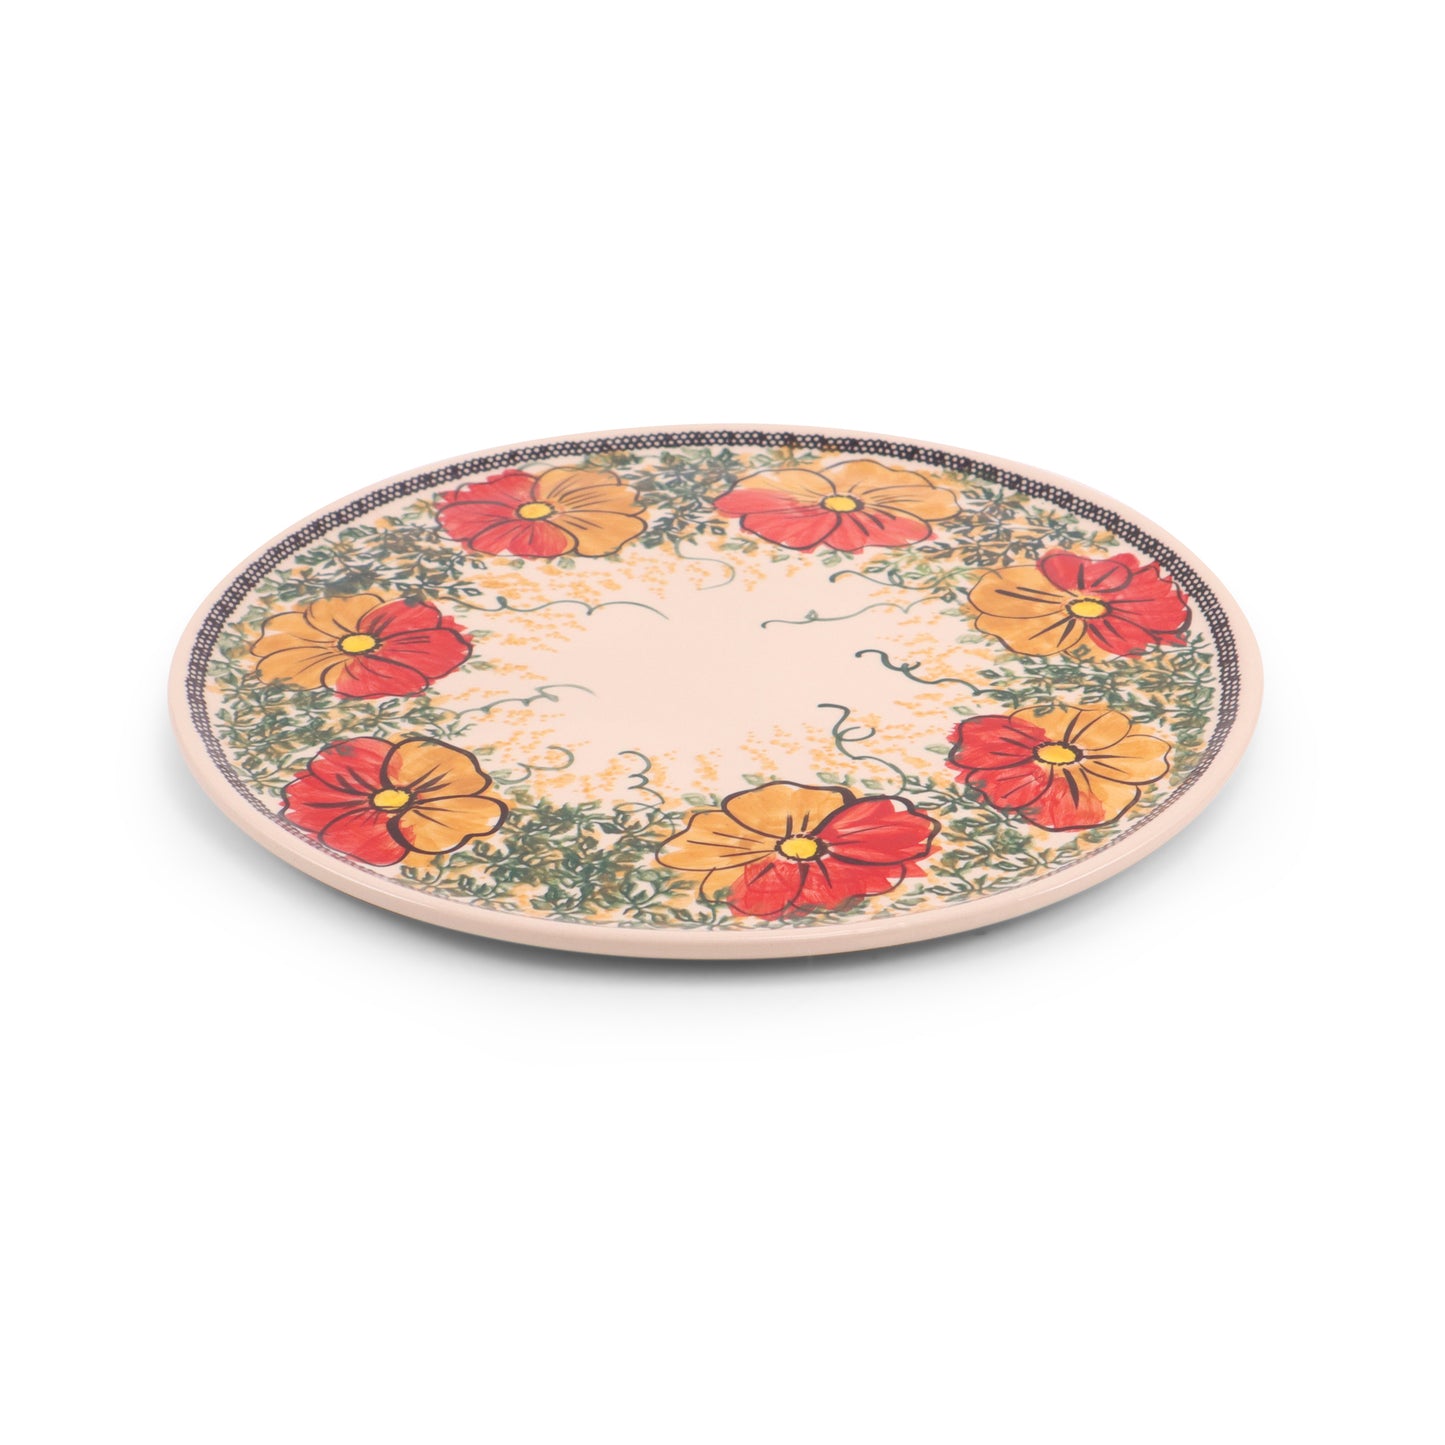 12" Pizza Plate. Pattern: Turning Leaves